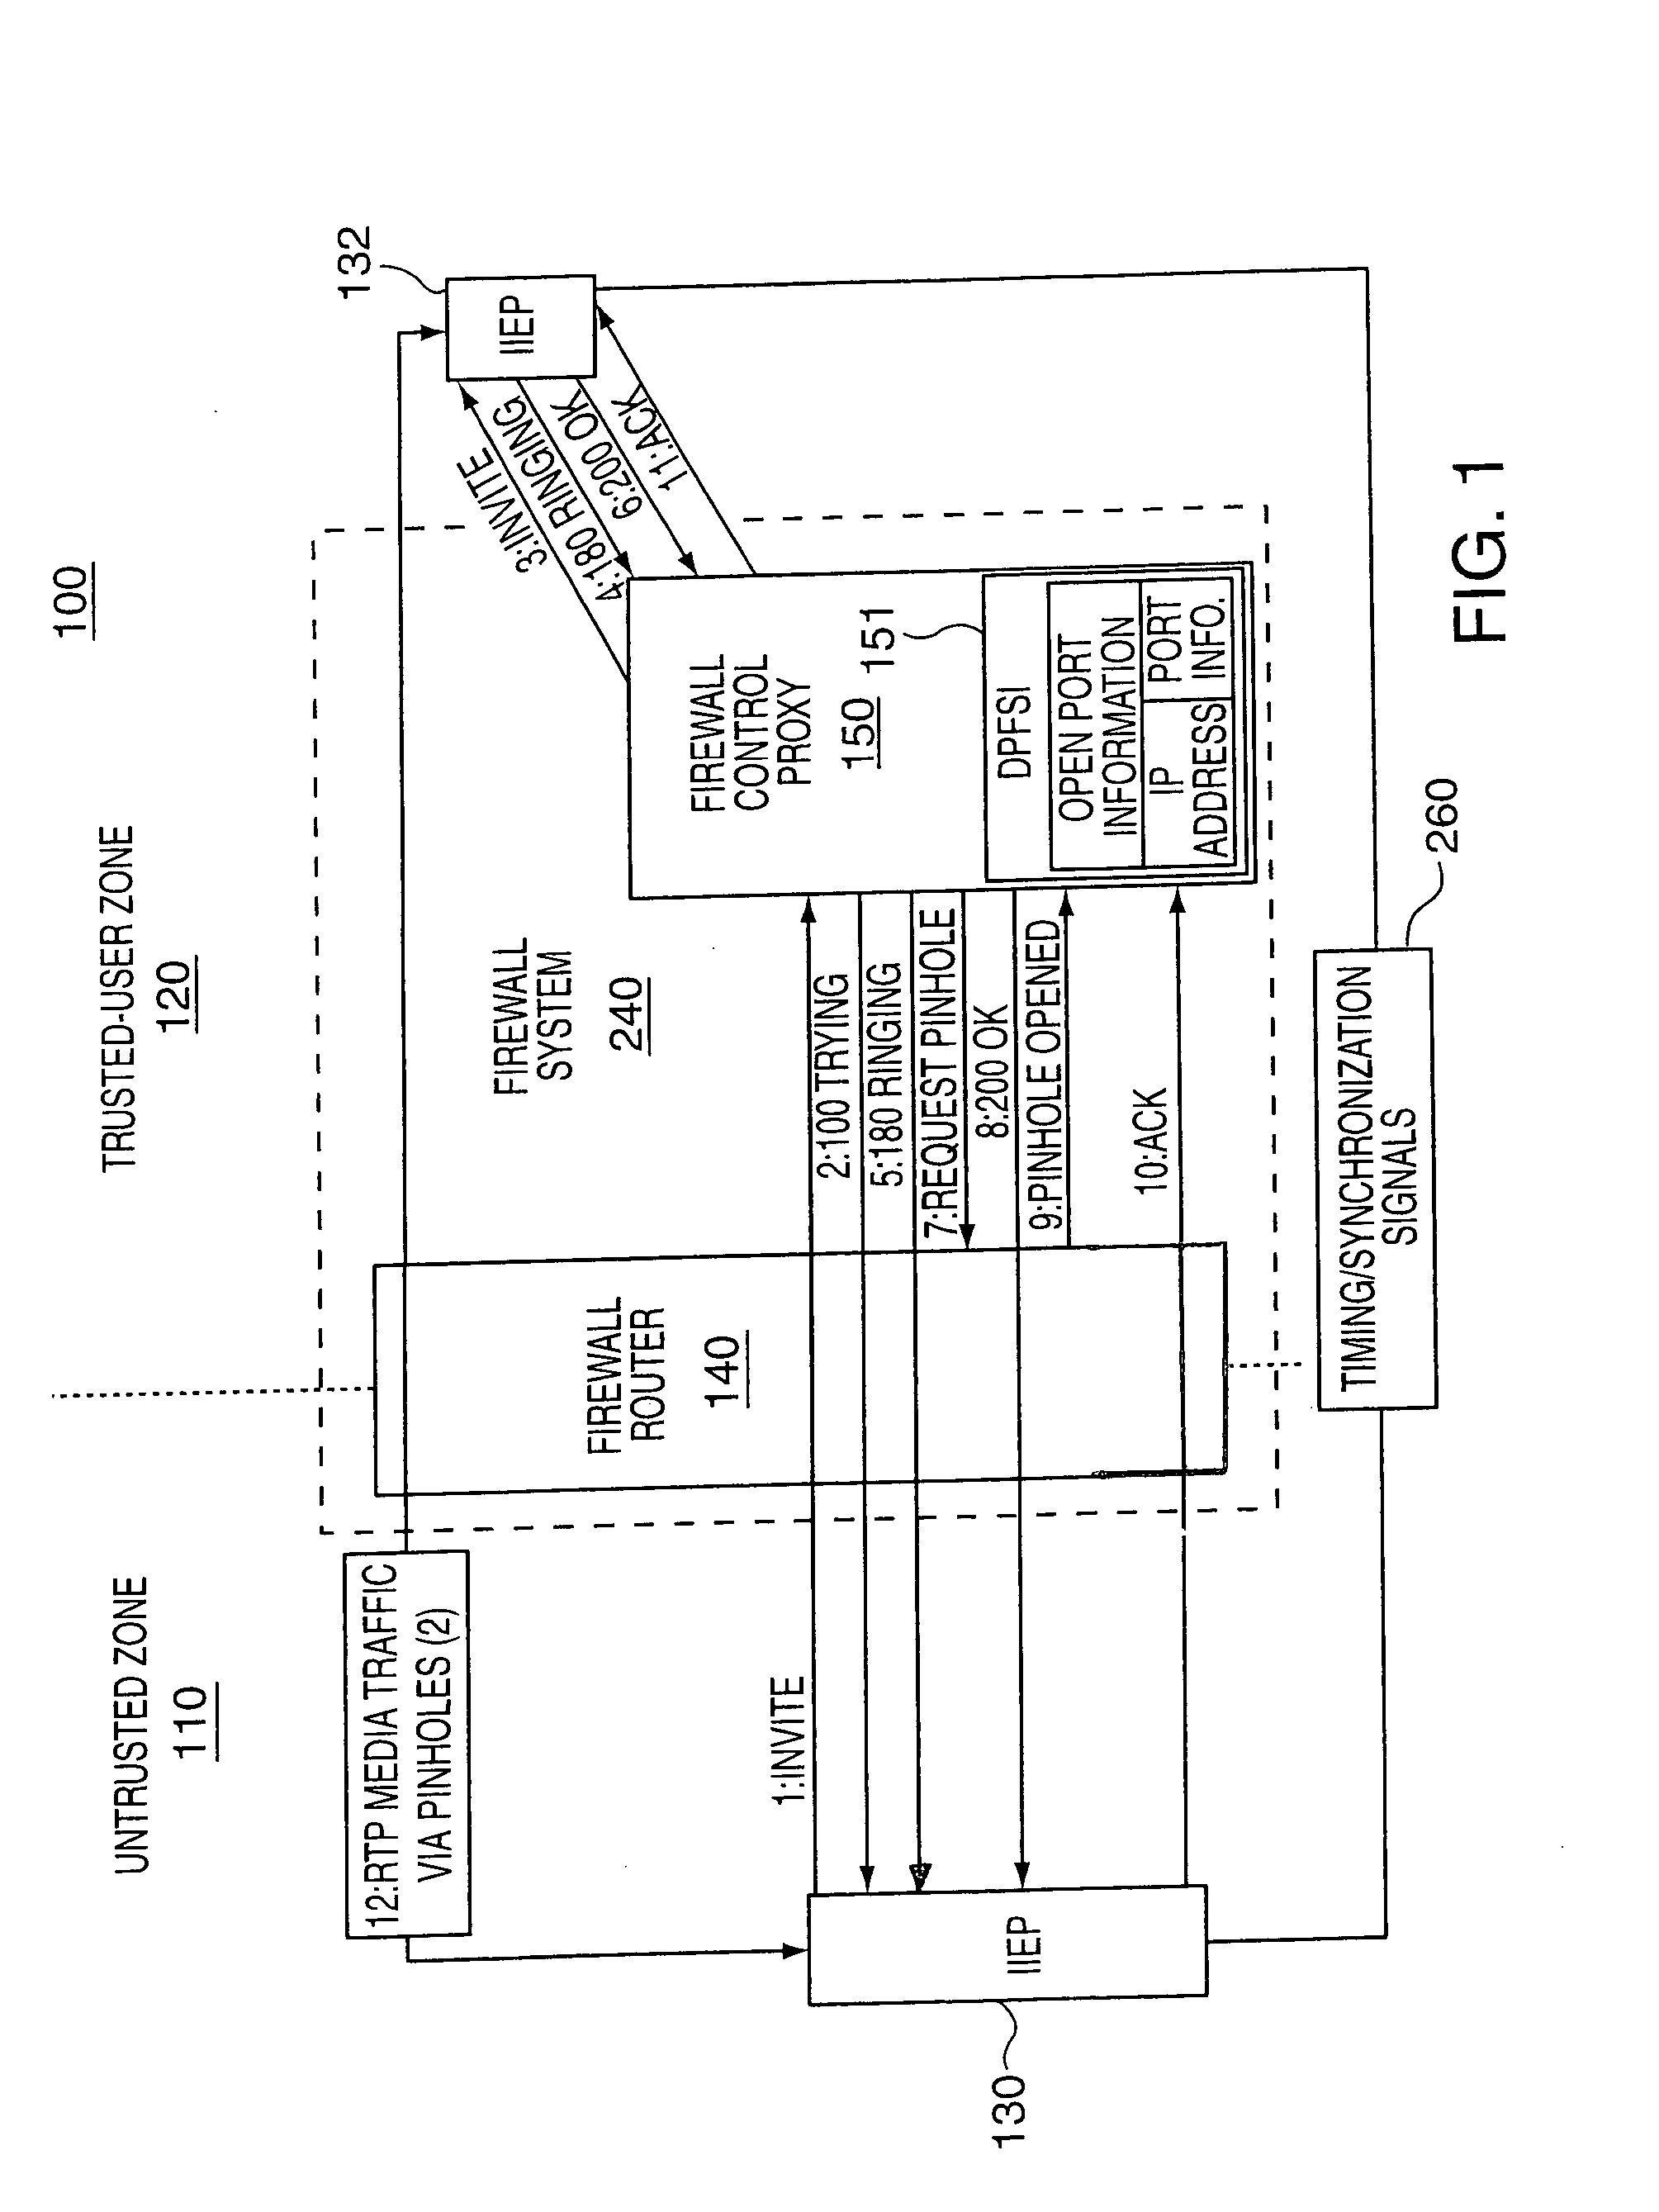 Network firewall test methods and apparatus